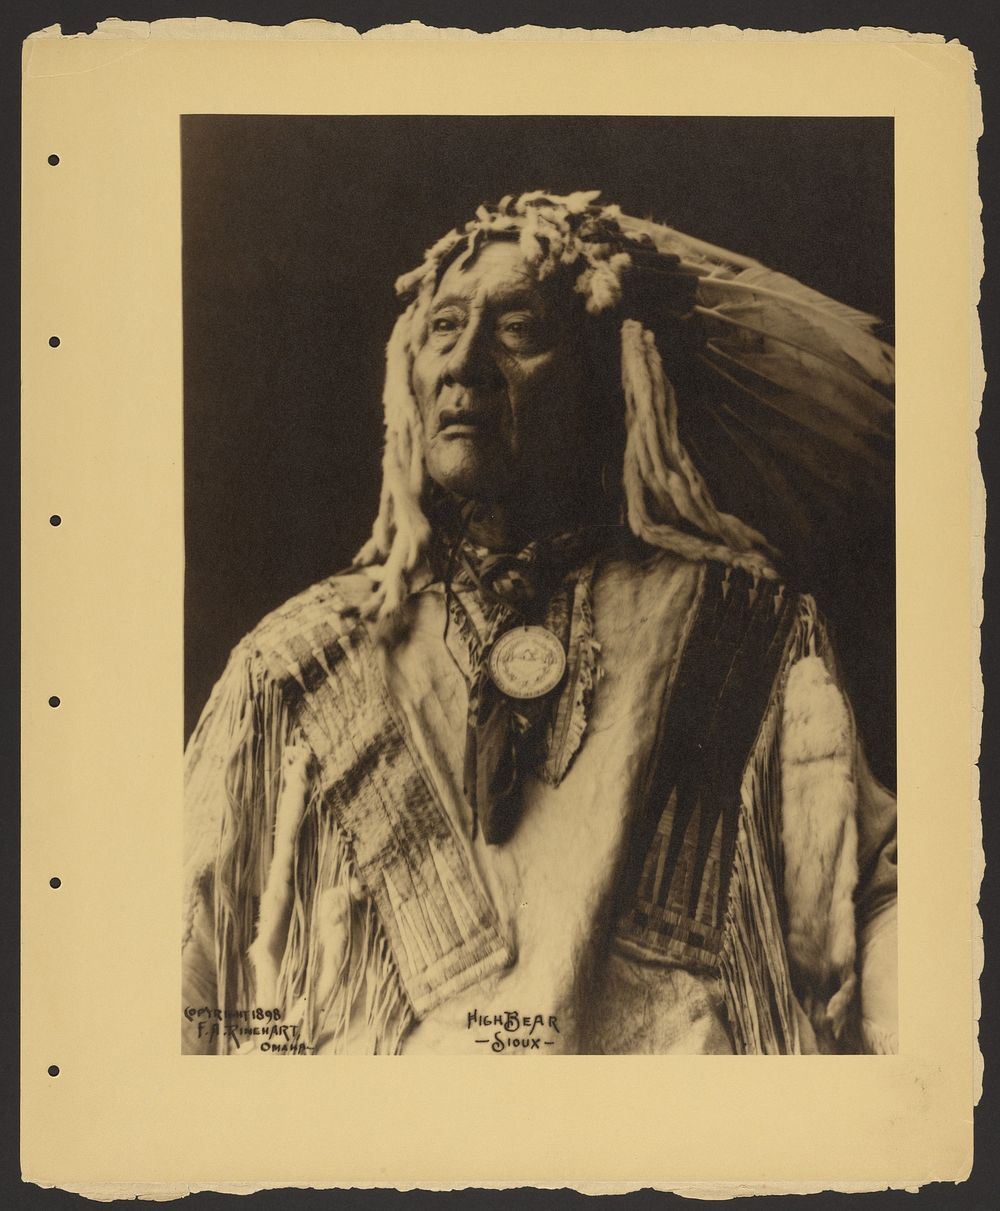 High Bear, Sioux by Adolph F Muhr and Frank A Rinehart